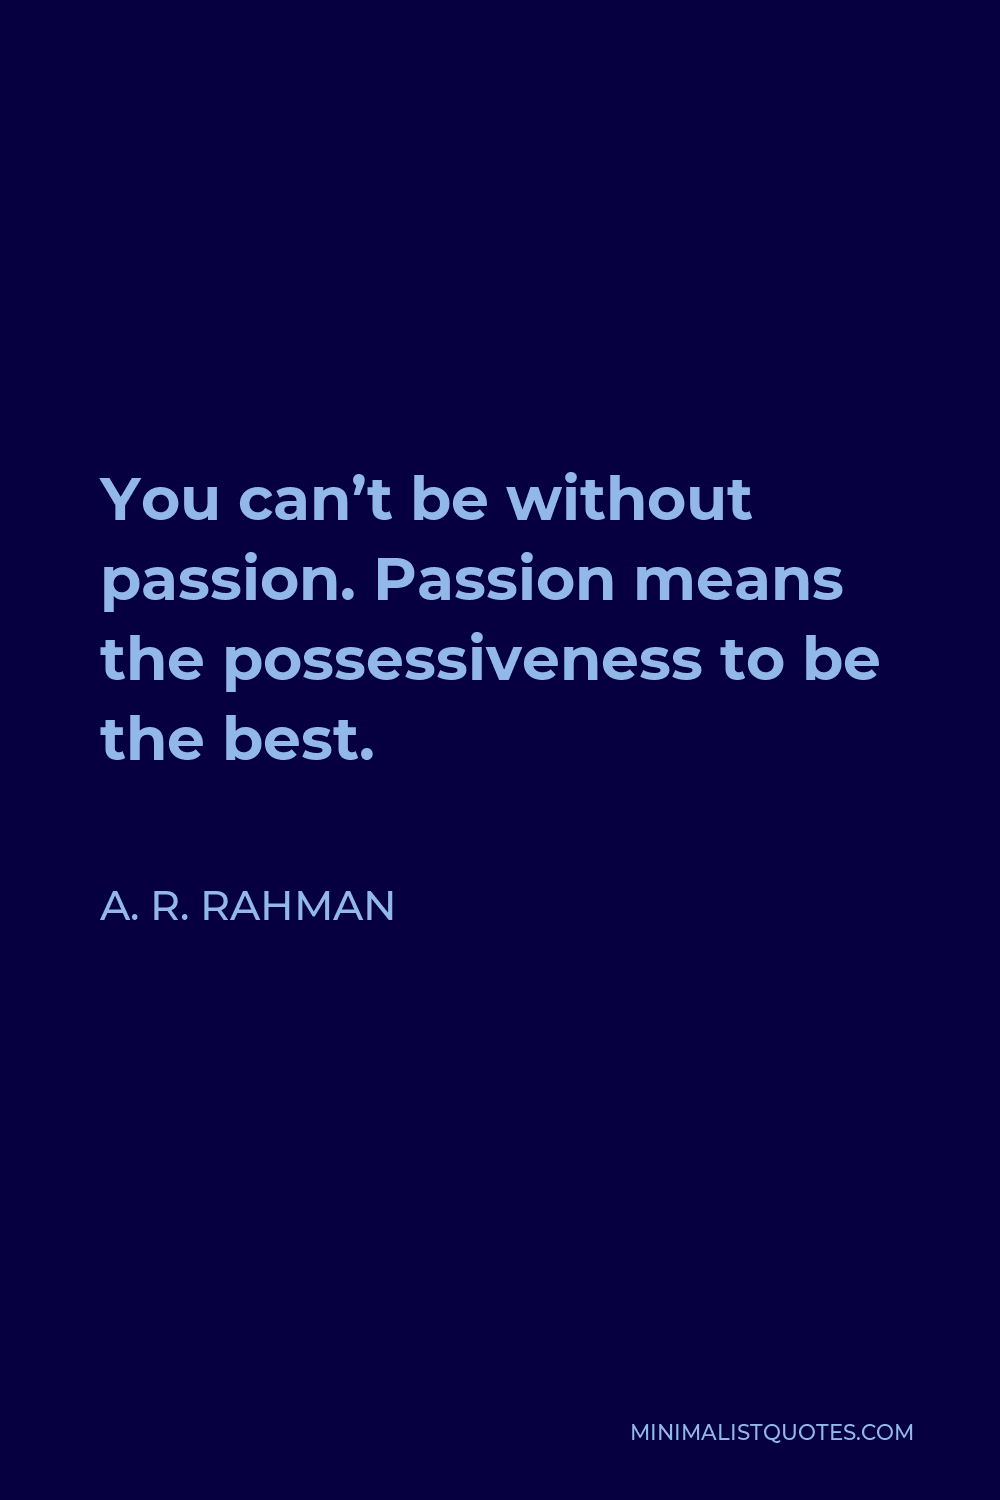 A. R. Rahman Quote - You can’t be without passion. Passion means the possessiveness to be the best.